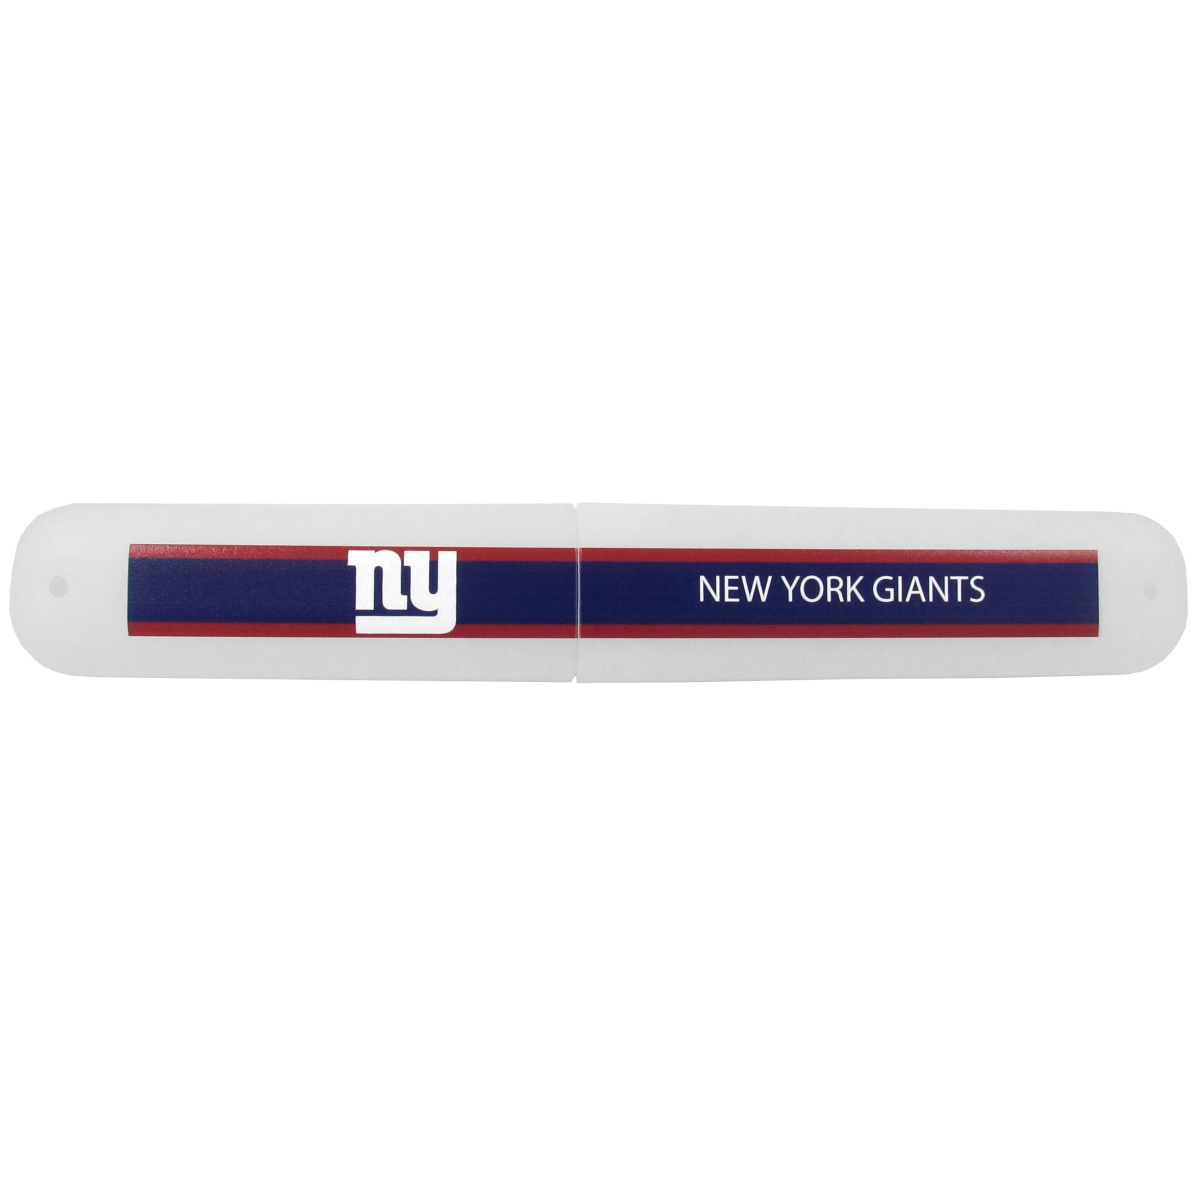 Picture of Siskiyou FTBC090 Unisex NFL New York Giants Travel Toothbrush Case - One Size